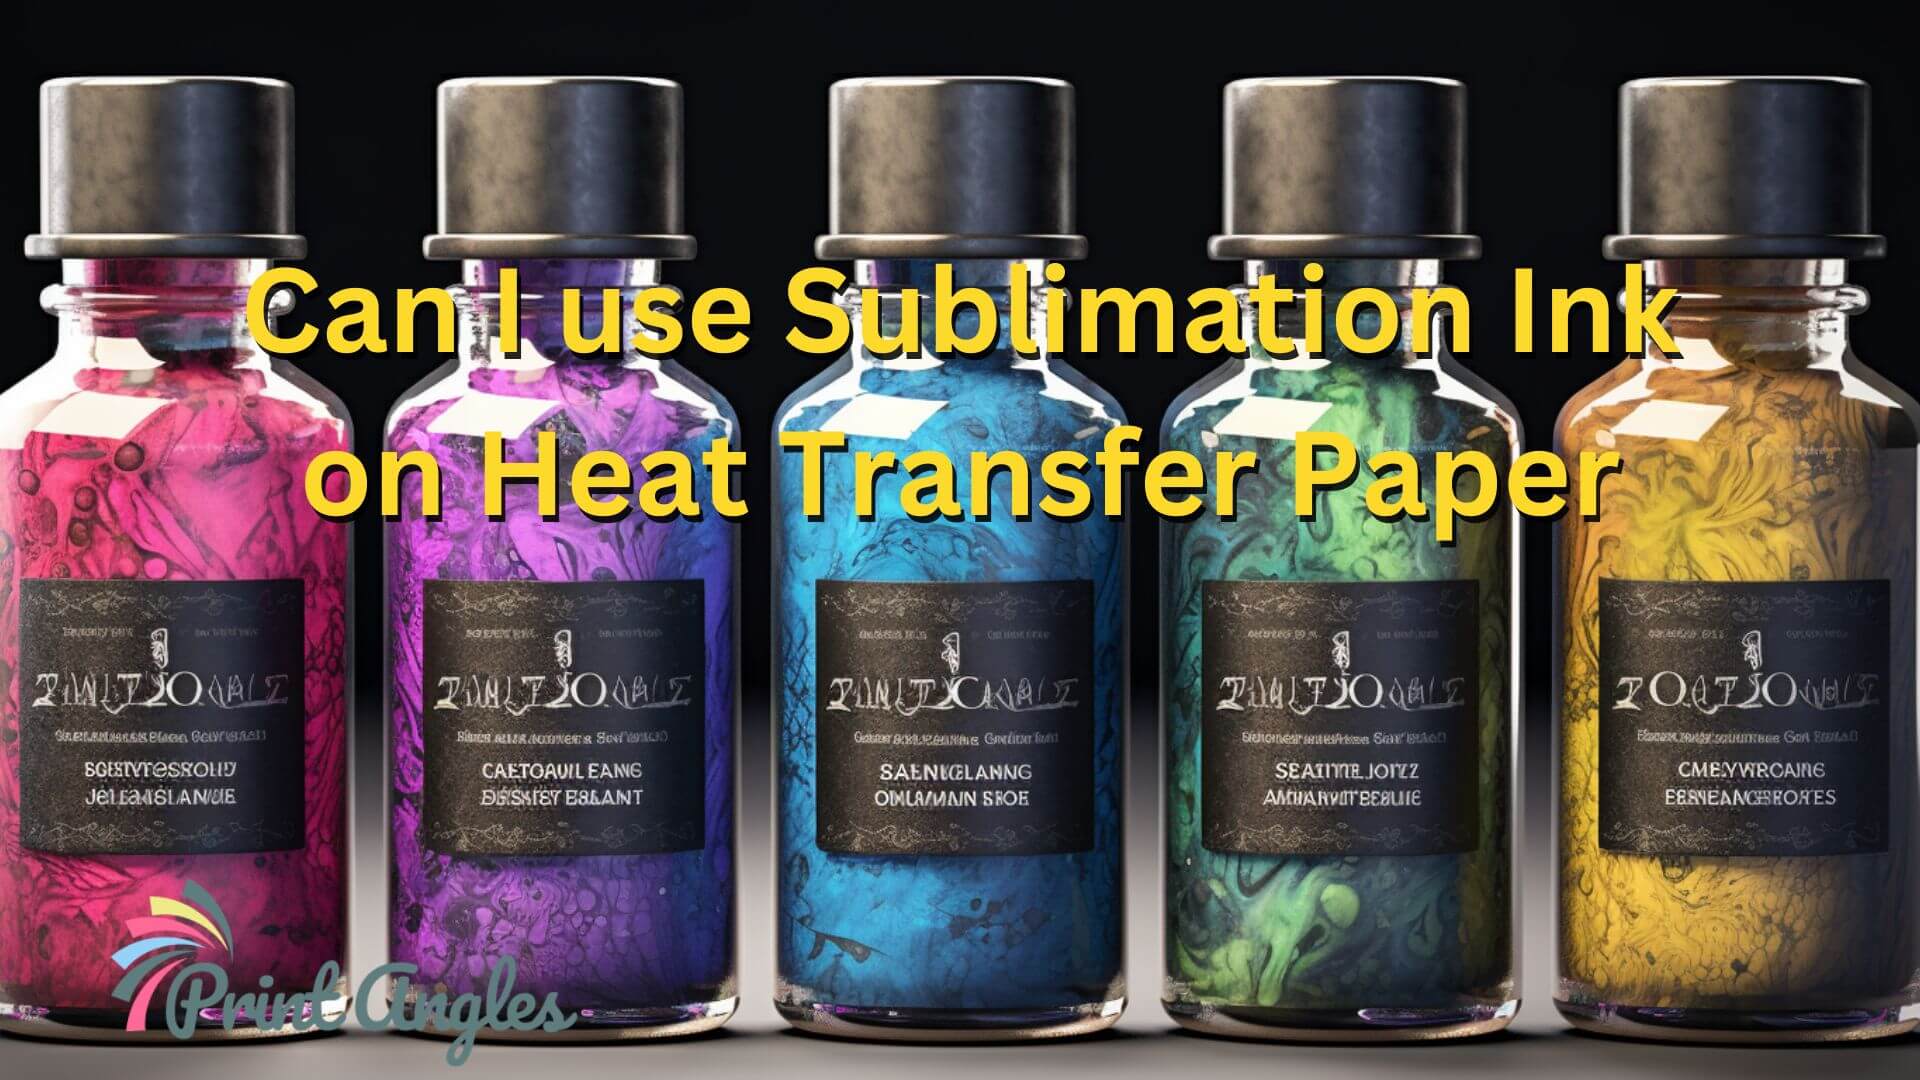 Can I use Sublimation Ink on Heat Transfer Paper